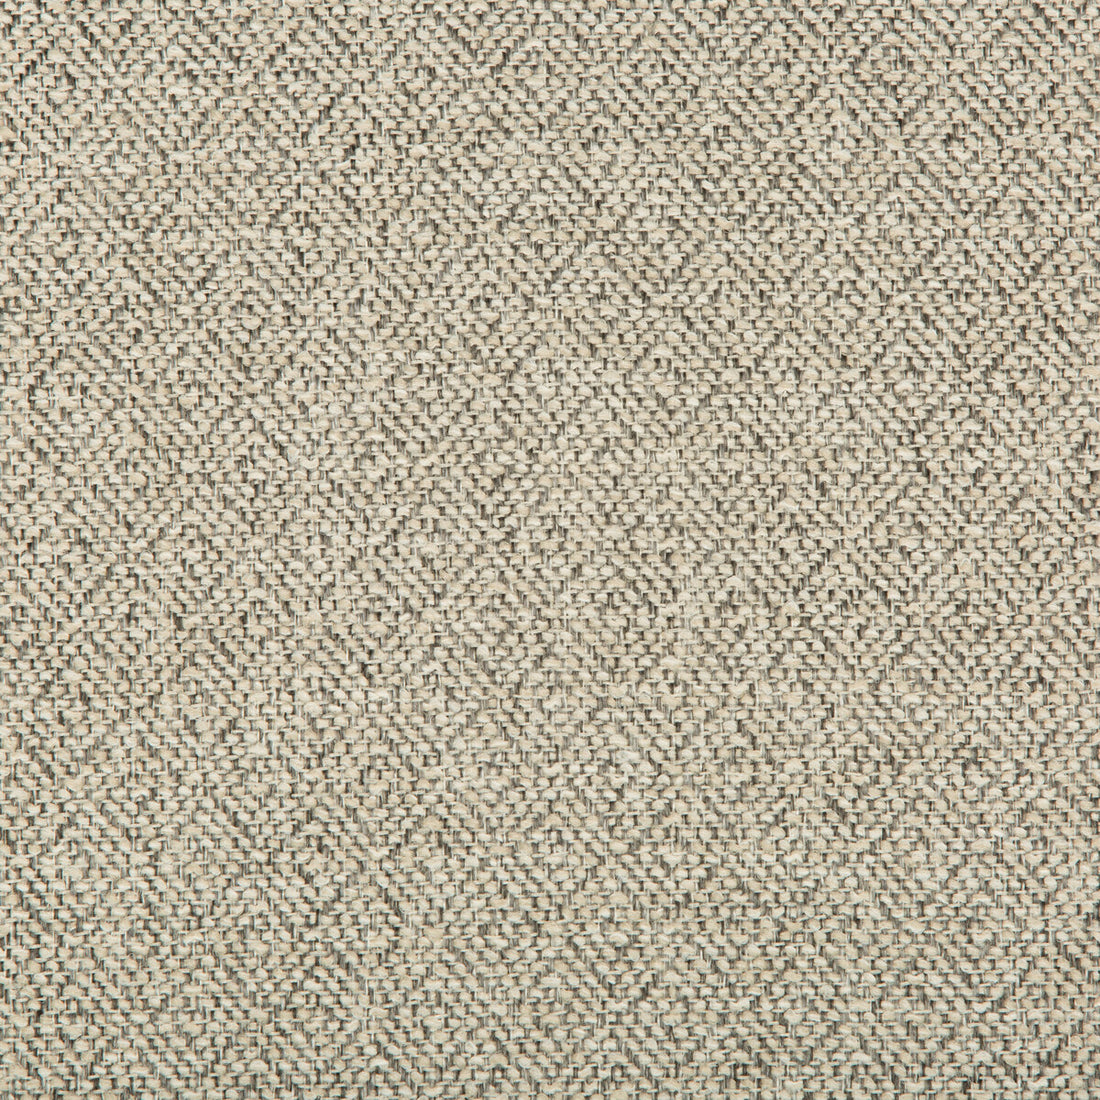 Kravet Contract fabric in 35434-16 color - pattern 35434.16.0 - by Kravet Contract